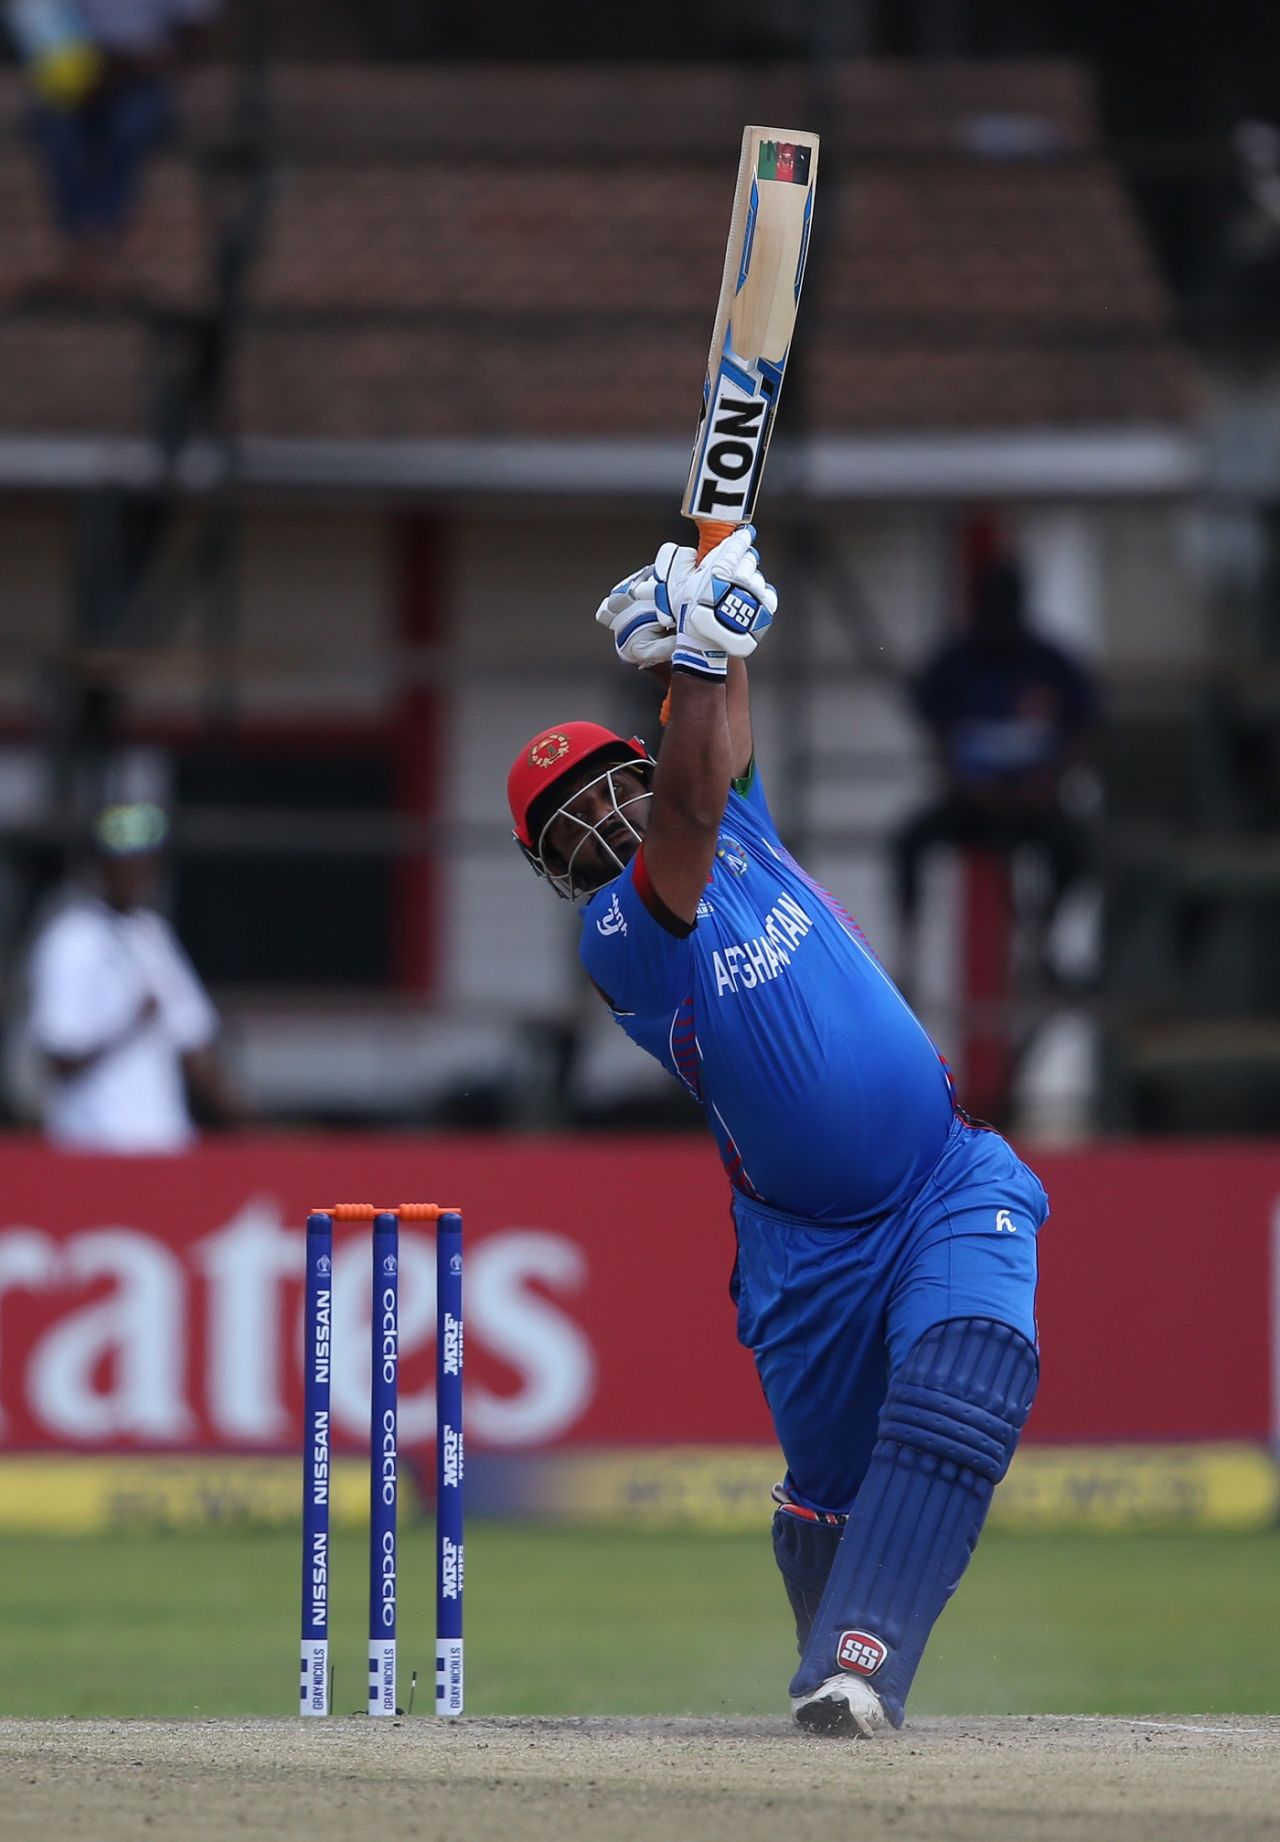 Mohammad Shahzad launches a six, Ireland v Afghanistan, World Cup Qualifiers, Harare, 23 March, 2018